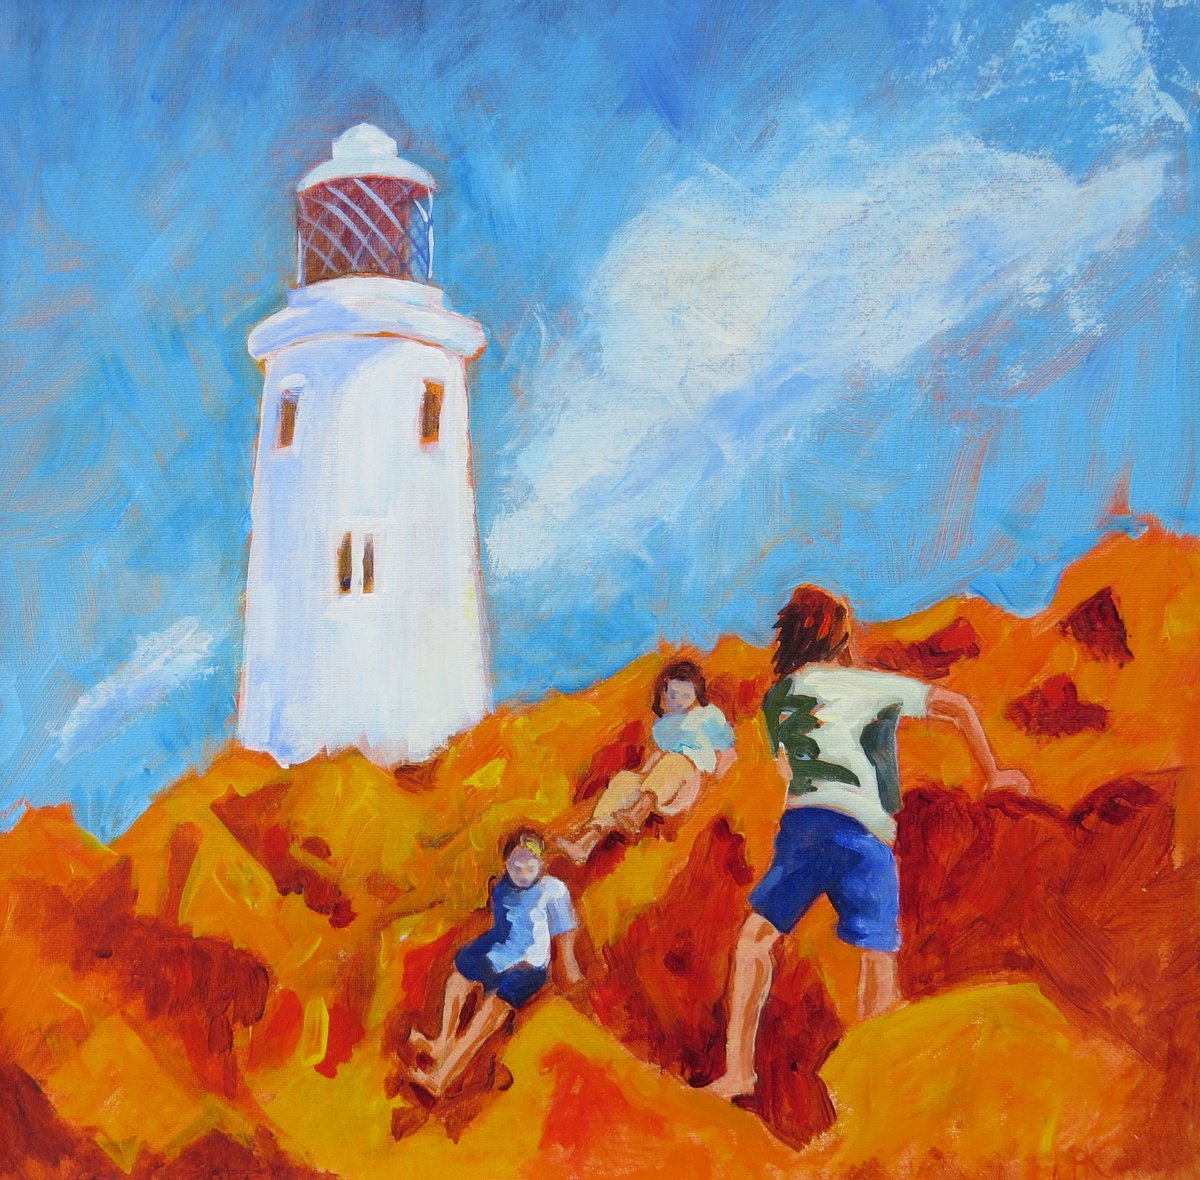 To the Lighthouse by Mary Kemp